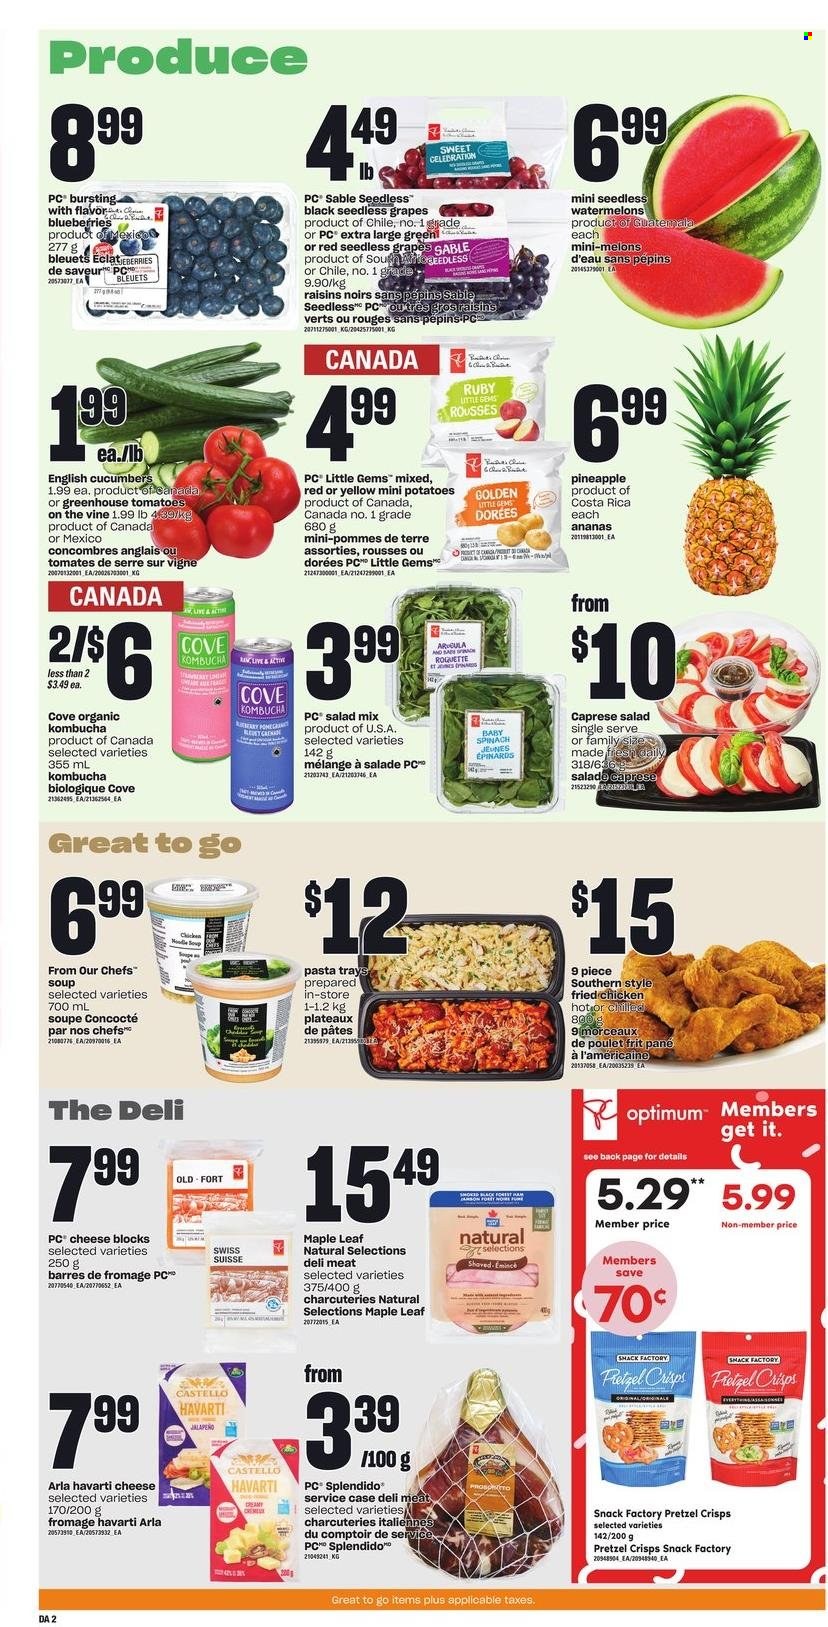 thumbnail - Dominion Flyer - March 23, 2023 - March 29, 2023 - Sales products - cucumber, spinach, potatoes, salad, jalapeño, blueberries, grapes, seedless grapes, pineapple, melons, soup, pasta, fried chicken, Havarti, cheese, Arla, snack, Celebration, pretzel crisps, dried fruit, kombucha, chicken, Optimum, toys, greenhouse, raisins. Page 2.